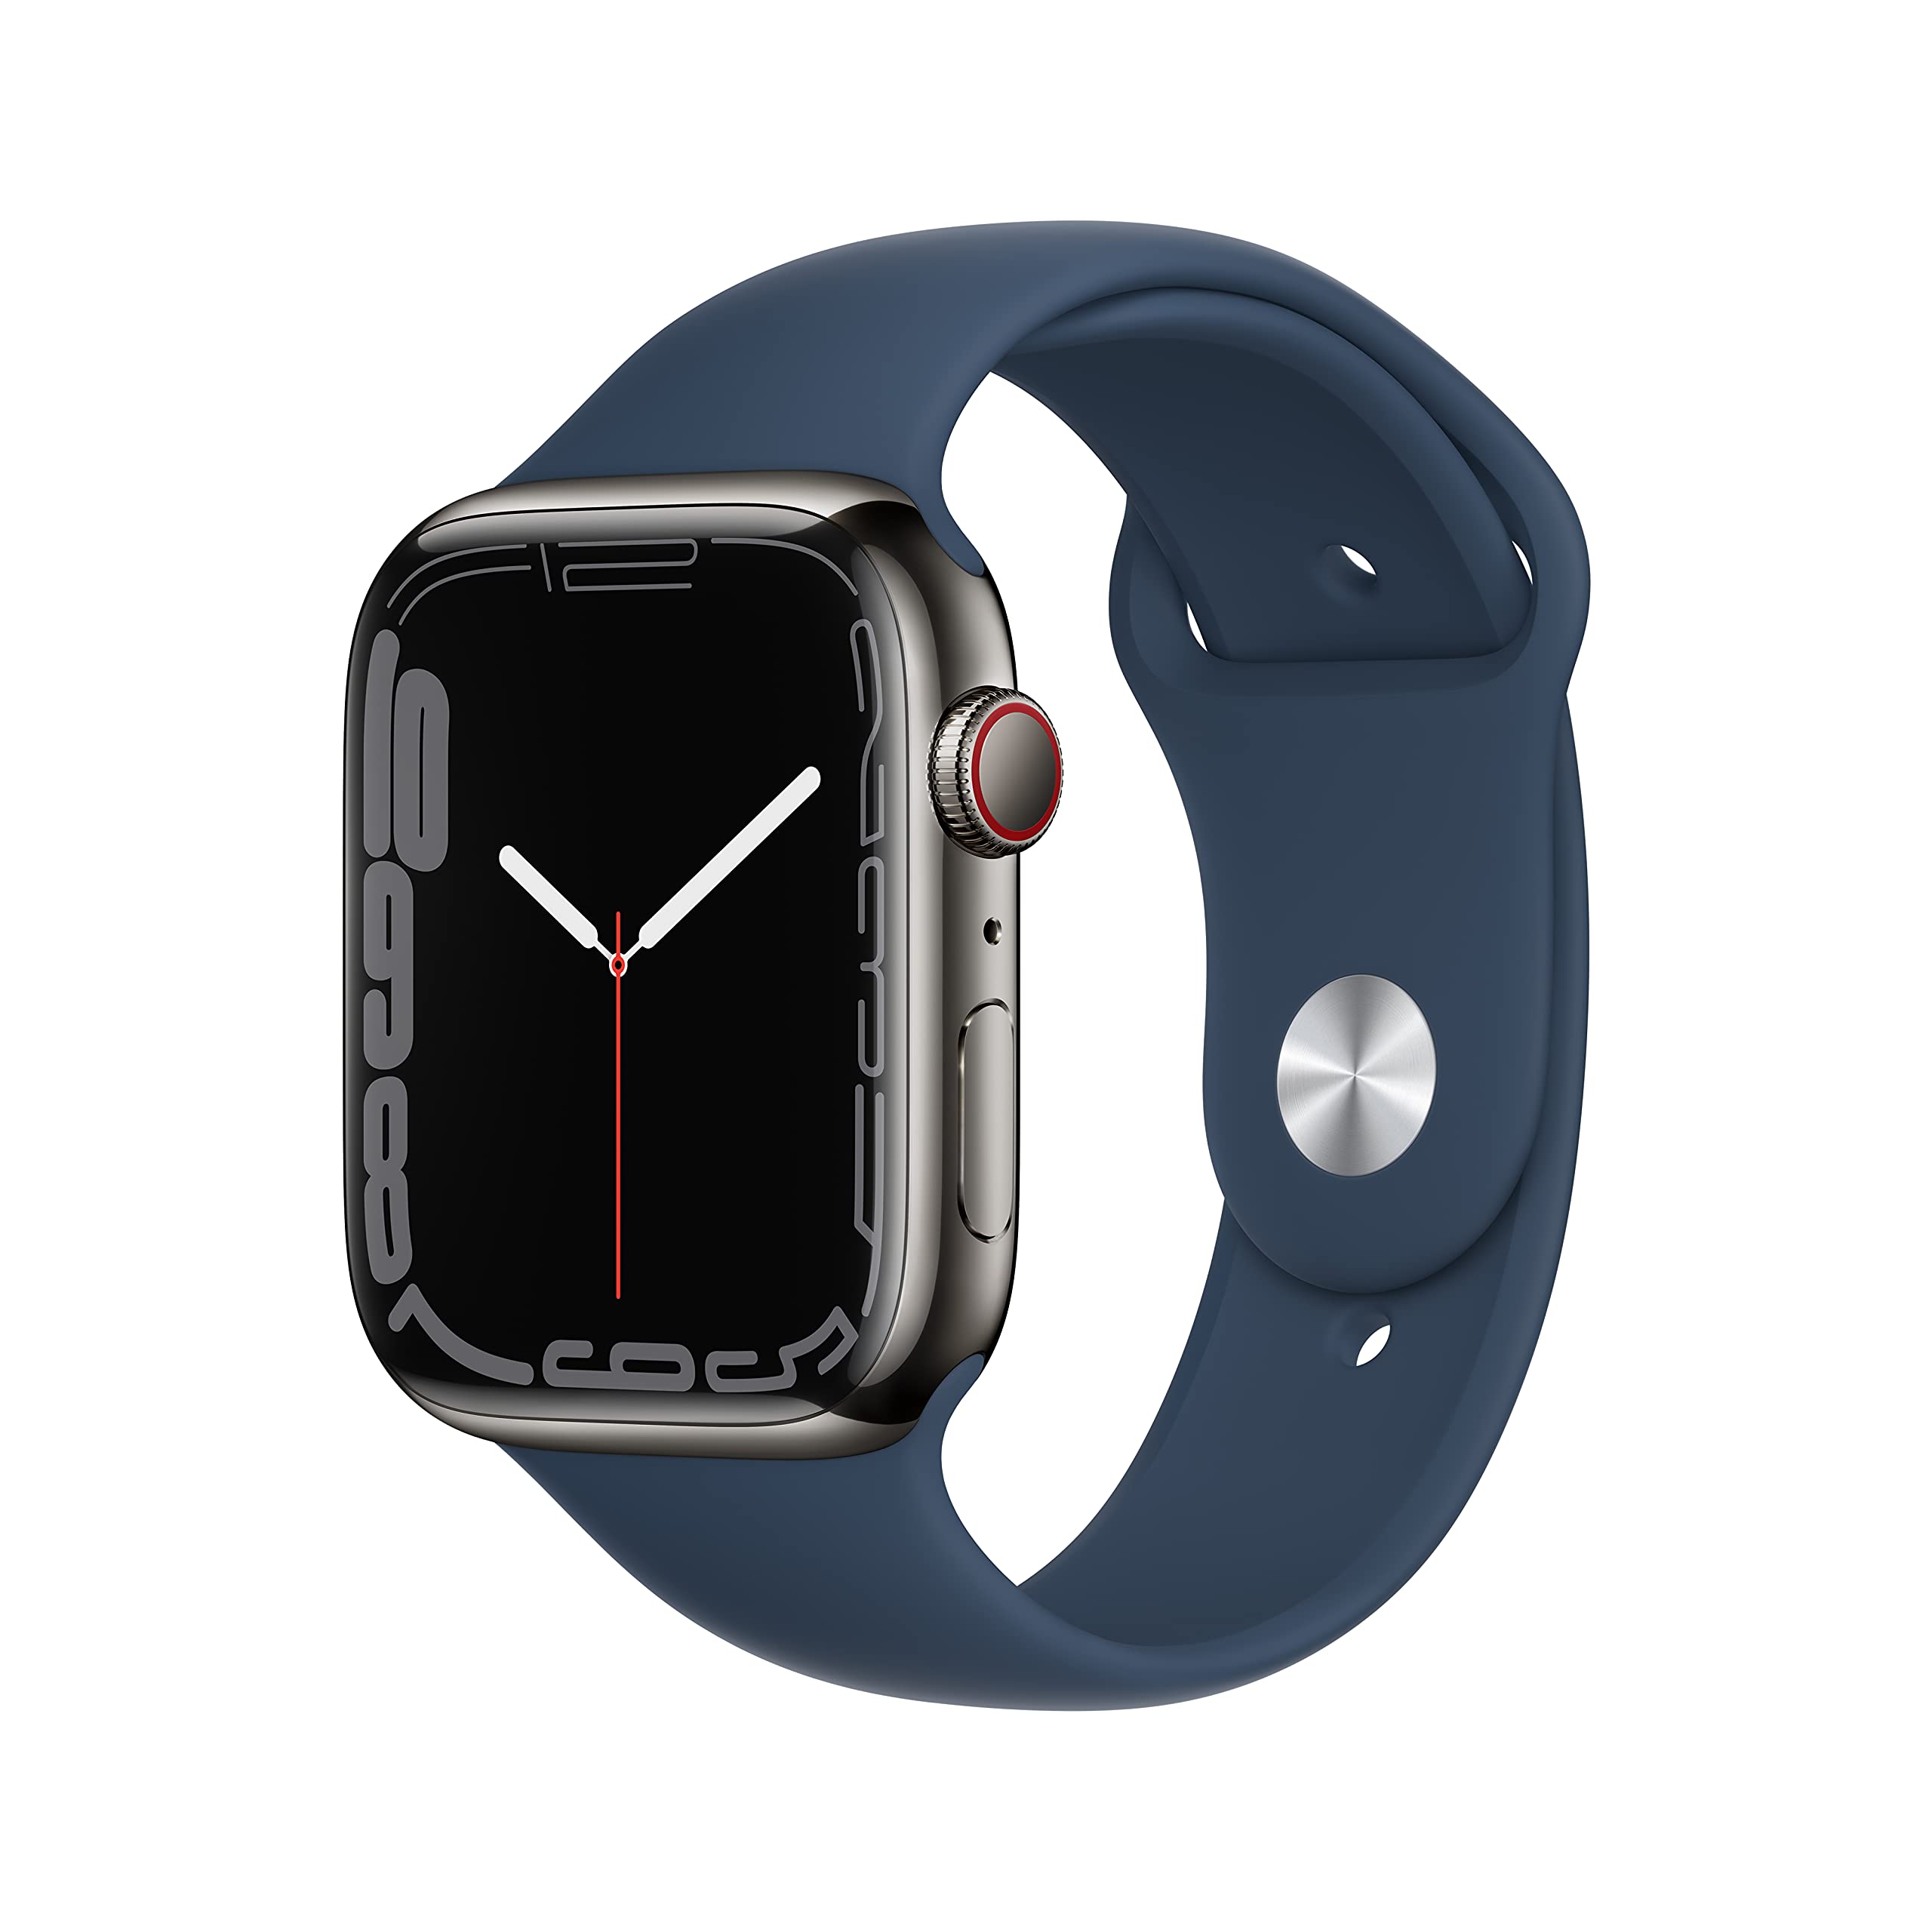 Apple Watch Series 7 GPS + Cellular 45mm Graphite Stainless Steel Case Smart Watch w/ Abyss Blue Sport Band $330.74 + Free Shipping